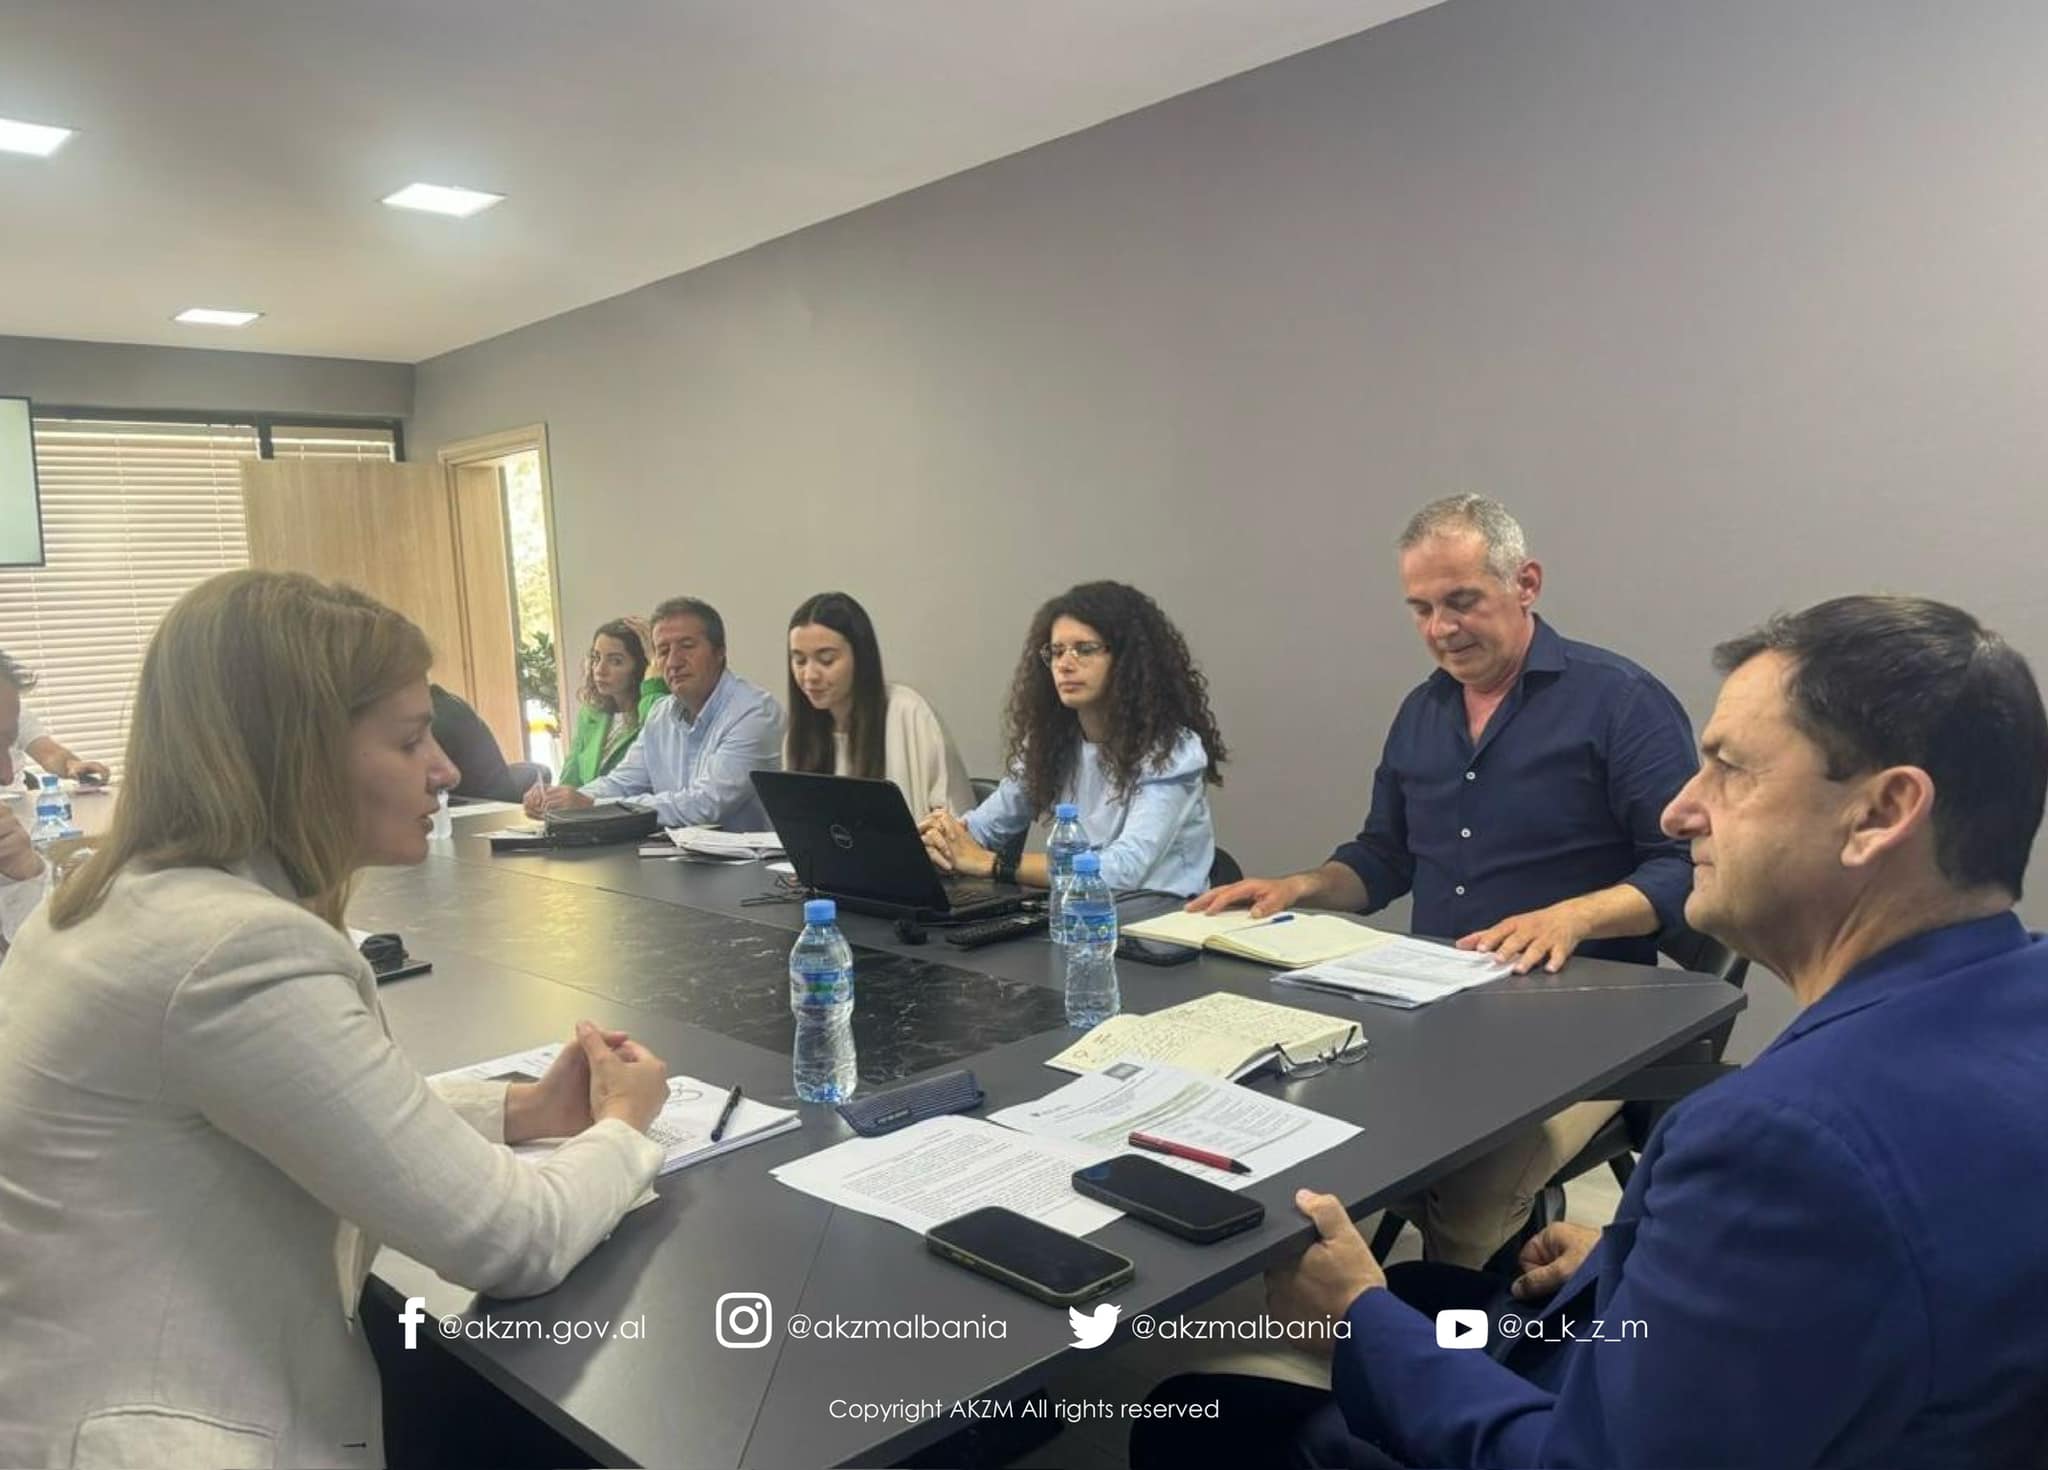 THE MANAGEMENT COMMITTEE OF THE ENVIRONMENTAL PROTECTED AREAS OF VLORA IS HELD